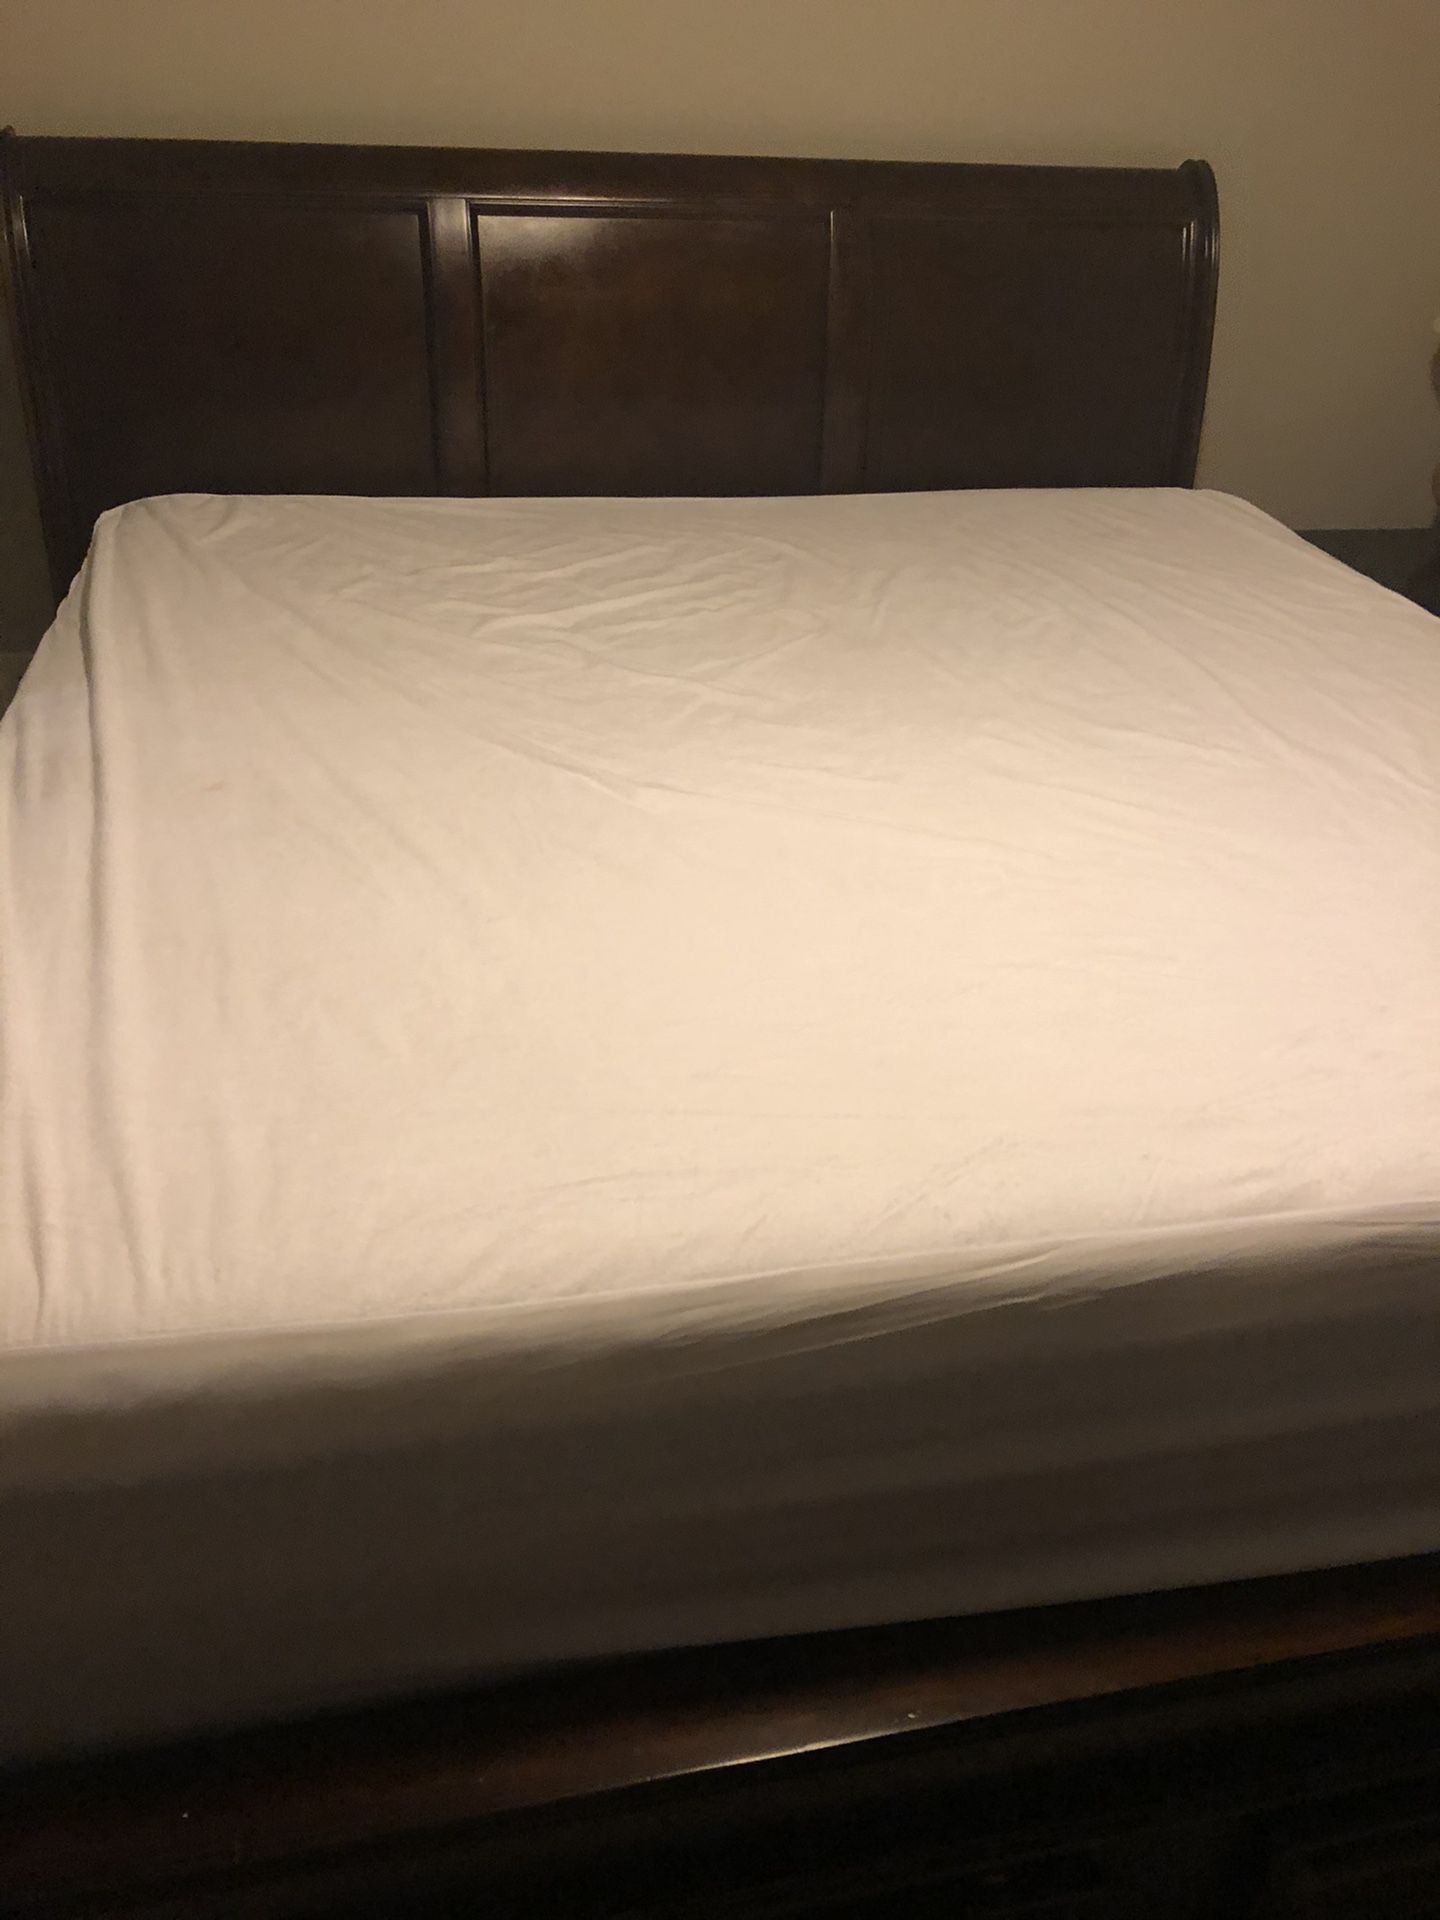 King Sized Bedroom Set- Moving and has to go - Price Is Negotiable!!!